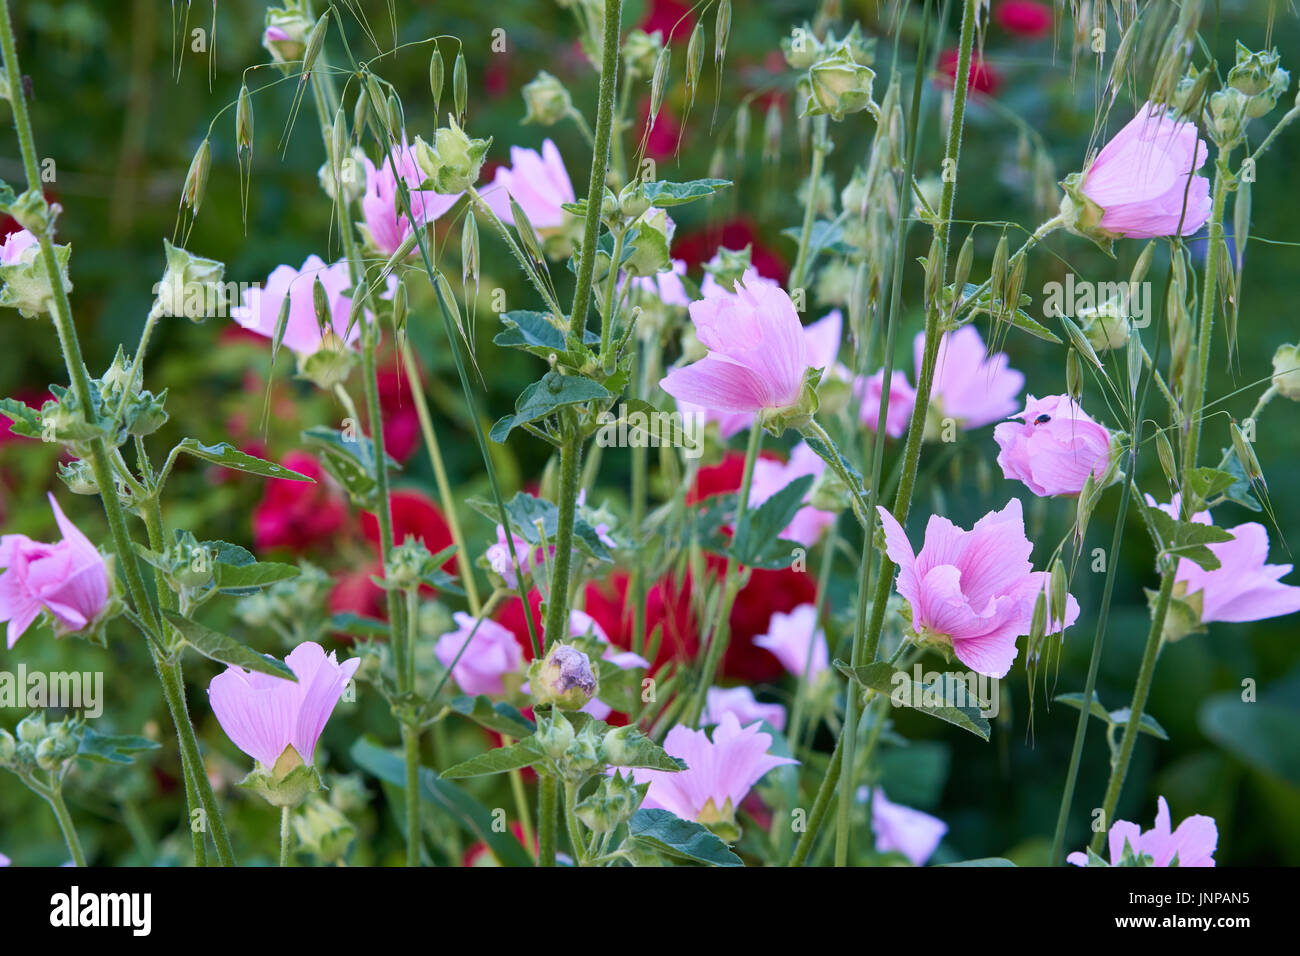 Pink flowers. Herb name Musk Mallow. Latin name Lavatera thuringiaca. And some oats. Stock Photo